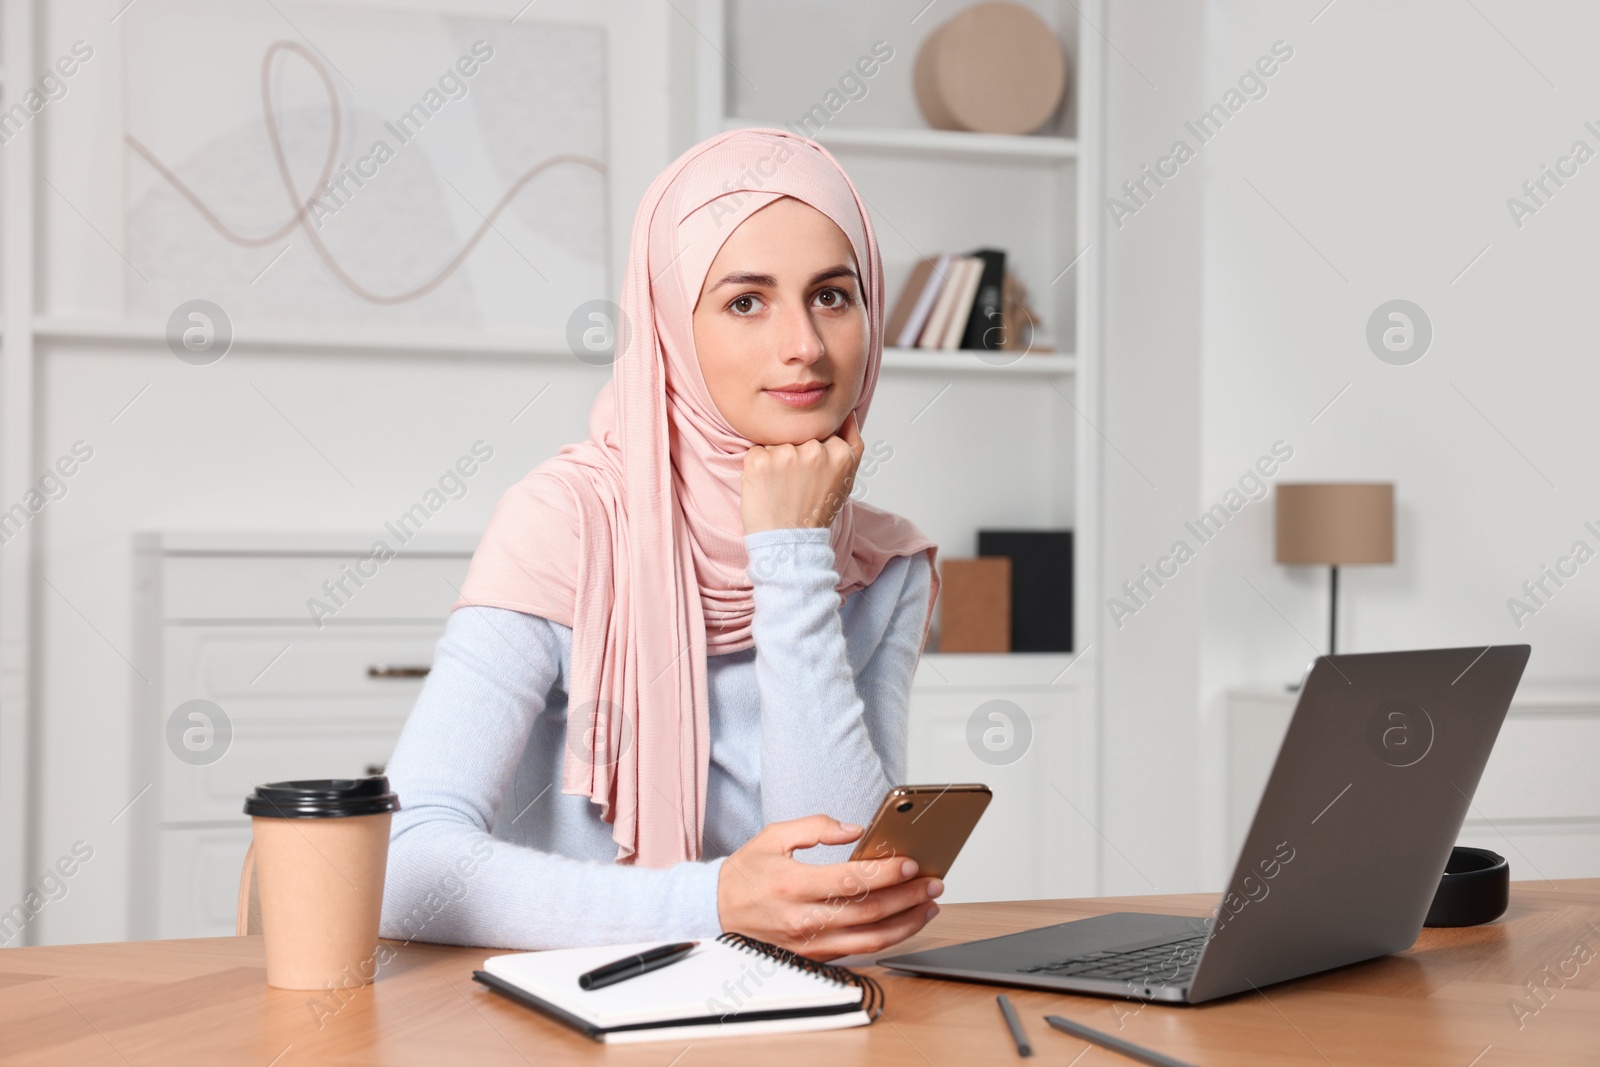 Photo of Muslim woman using smartphone near laptop at wooden table in room